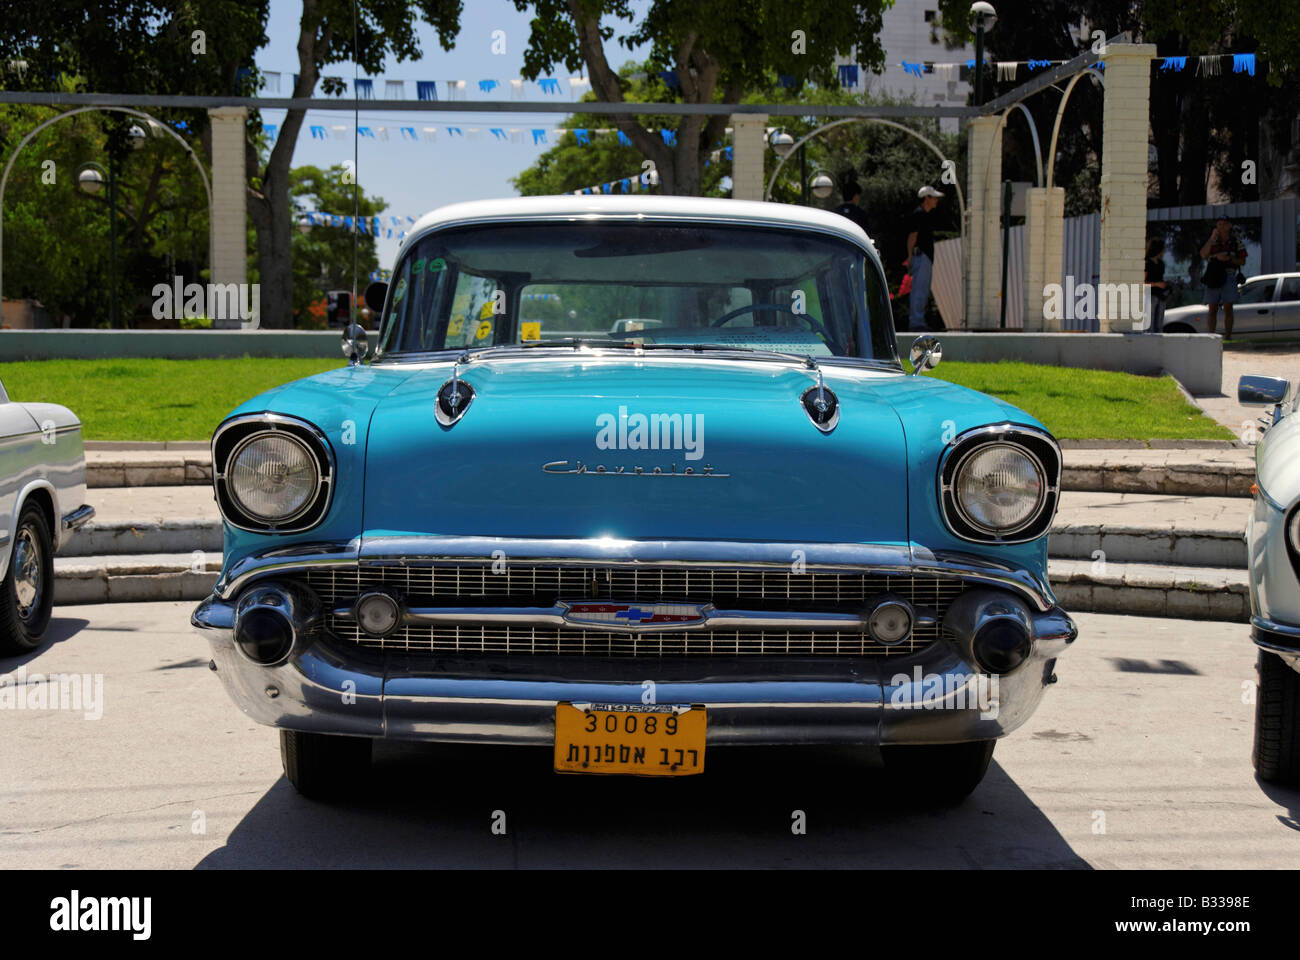 Vintage car Blue 1957 Chevrolet station wagon 210 front view Stock Photo